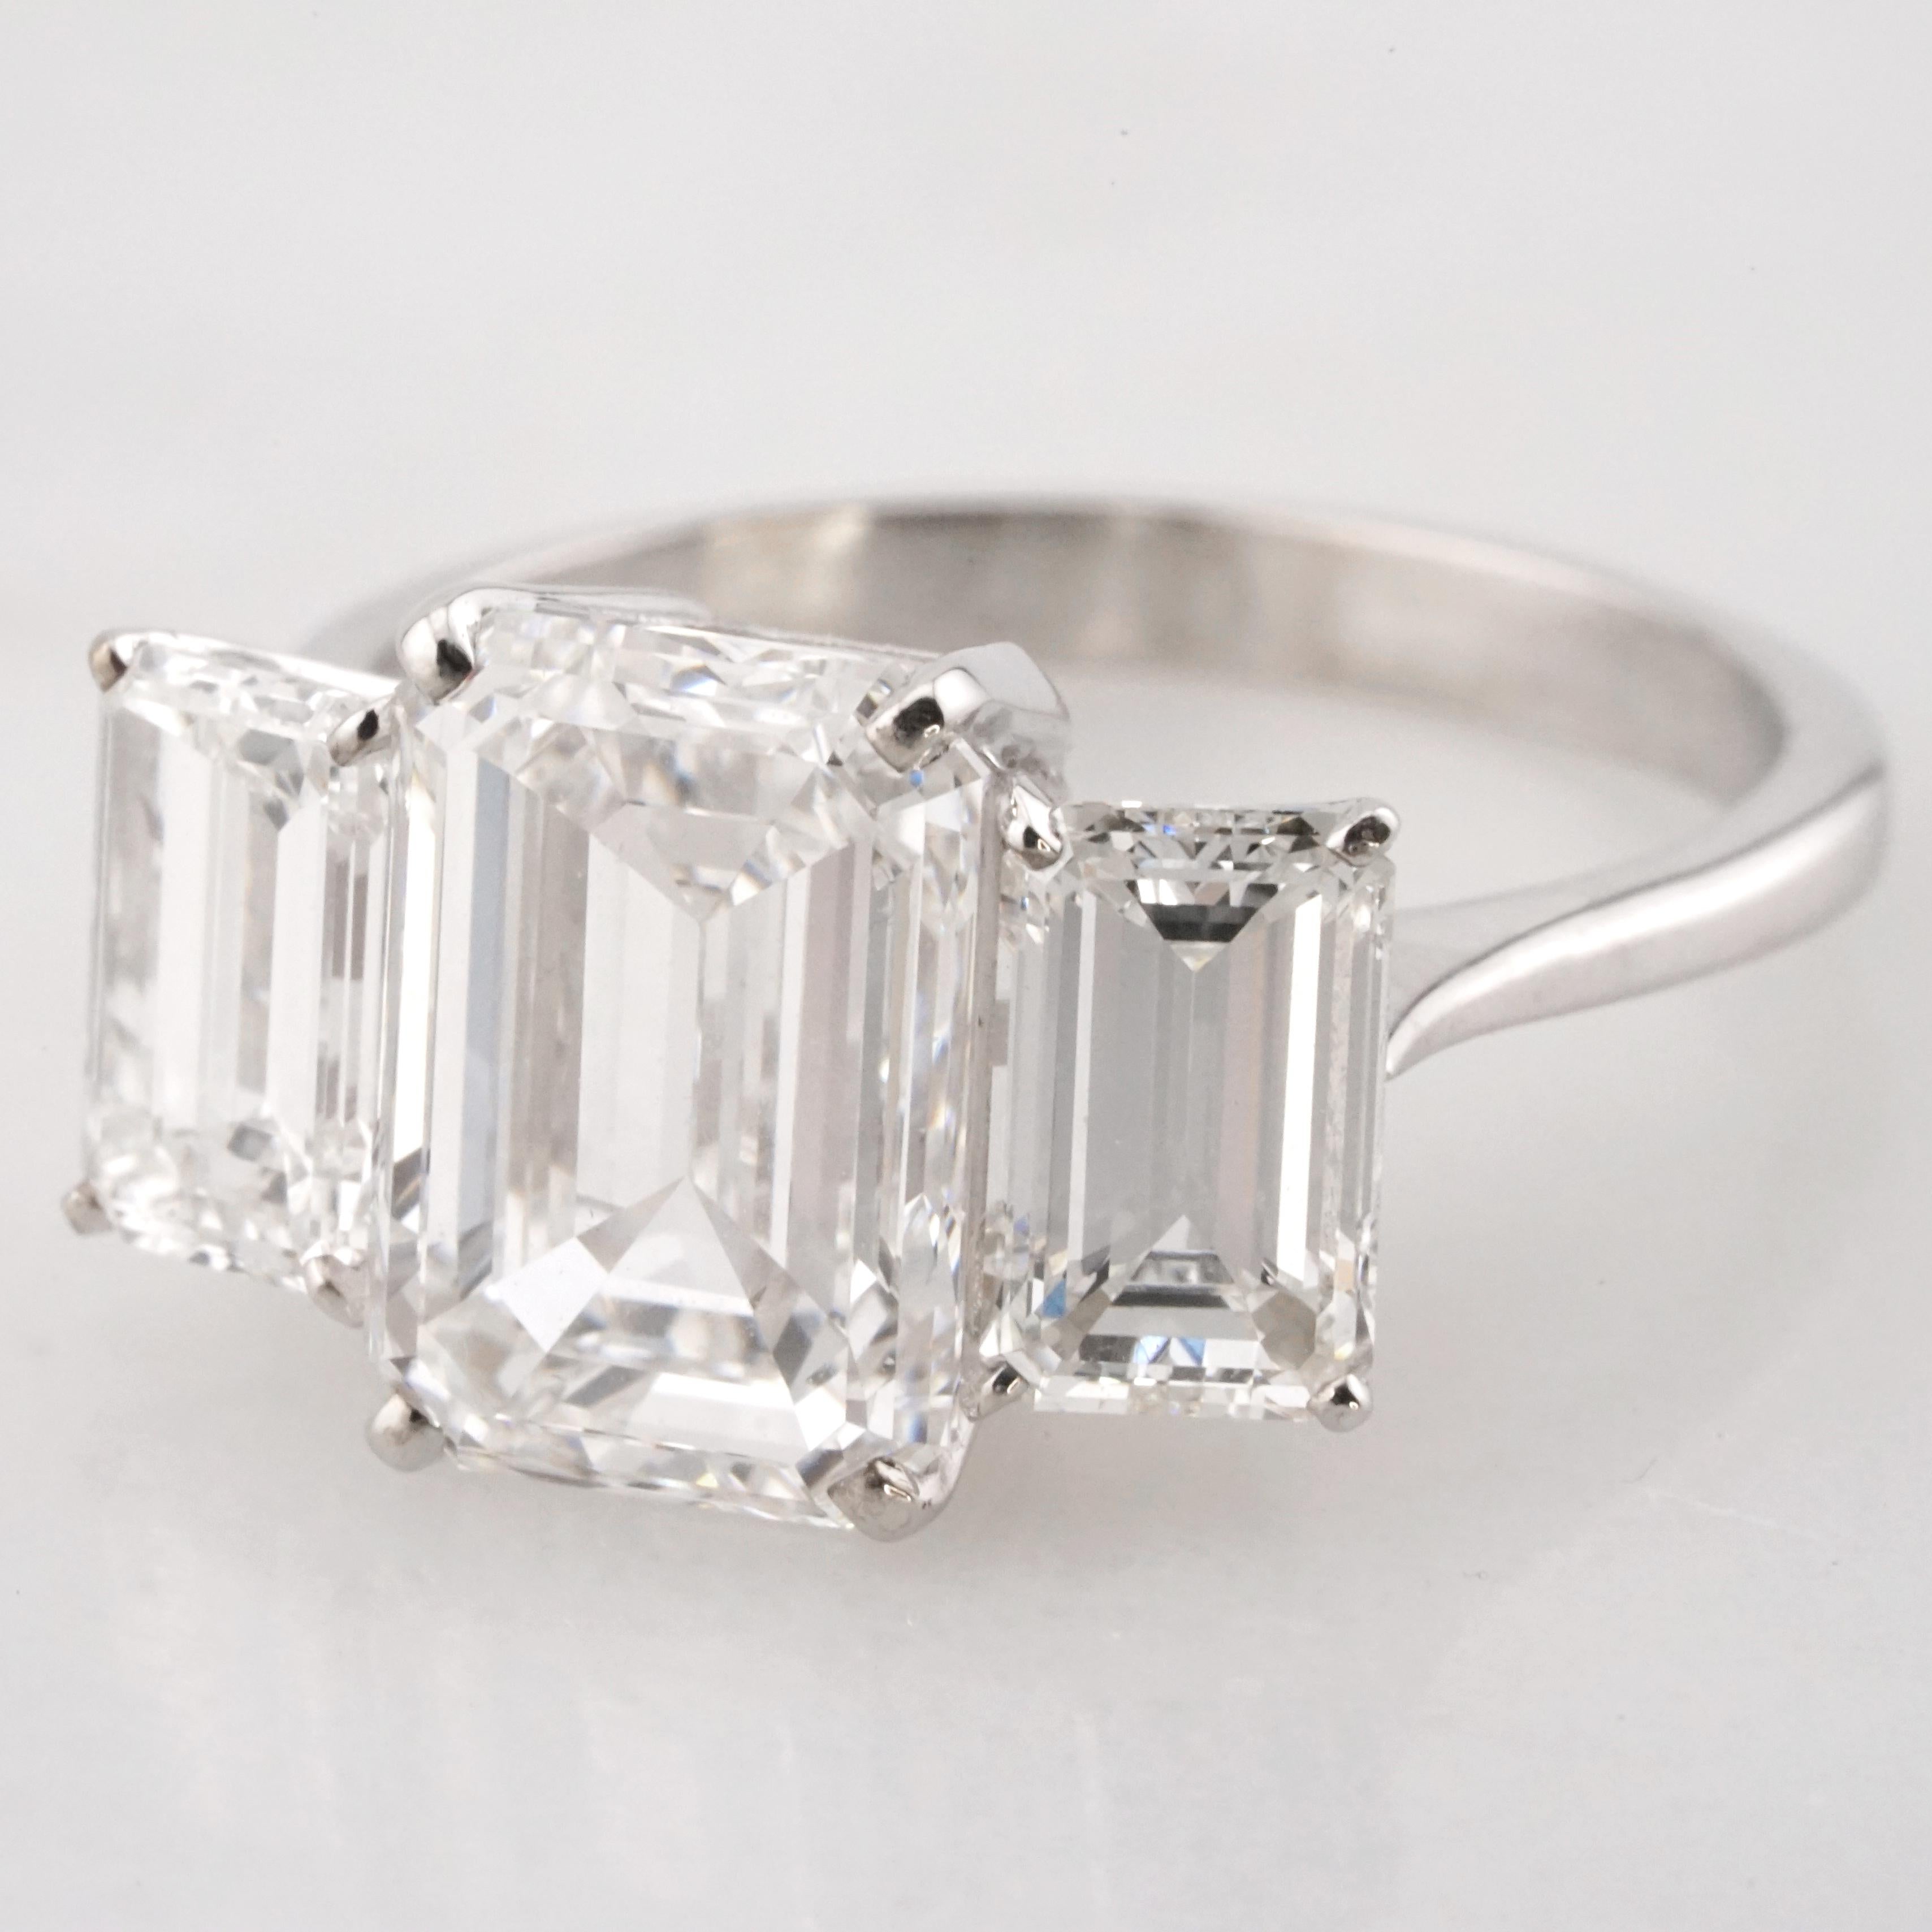 Imbued with an air of sophistication and expert artisanship, this engagement ring stands as a paragon of classic beauty. At the heart of its design lies a remarkable 3-carat emerald-cut diamond, a beacon of brilliance and purity. Its authenticity